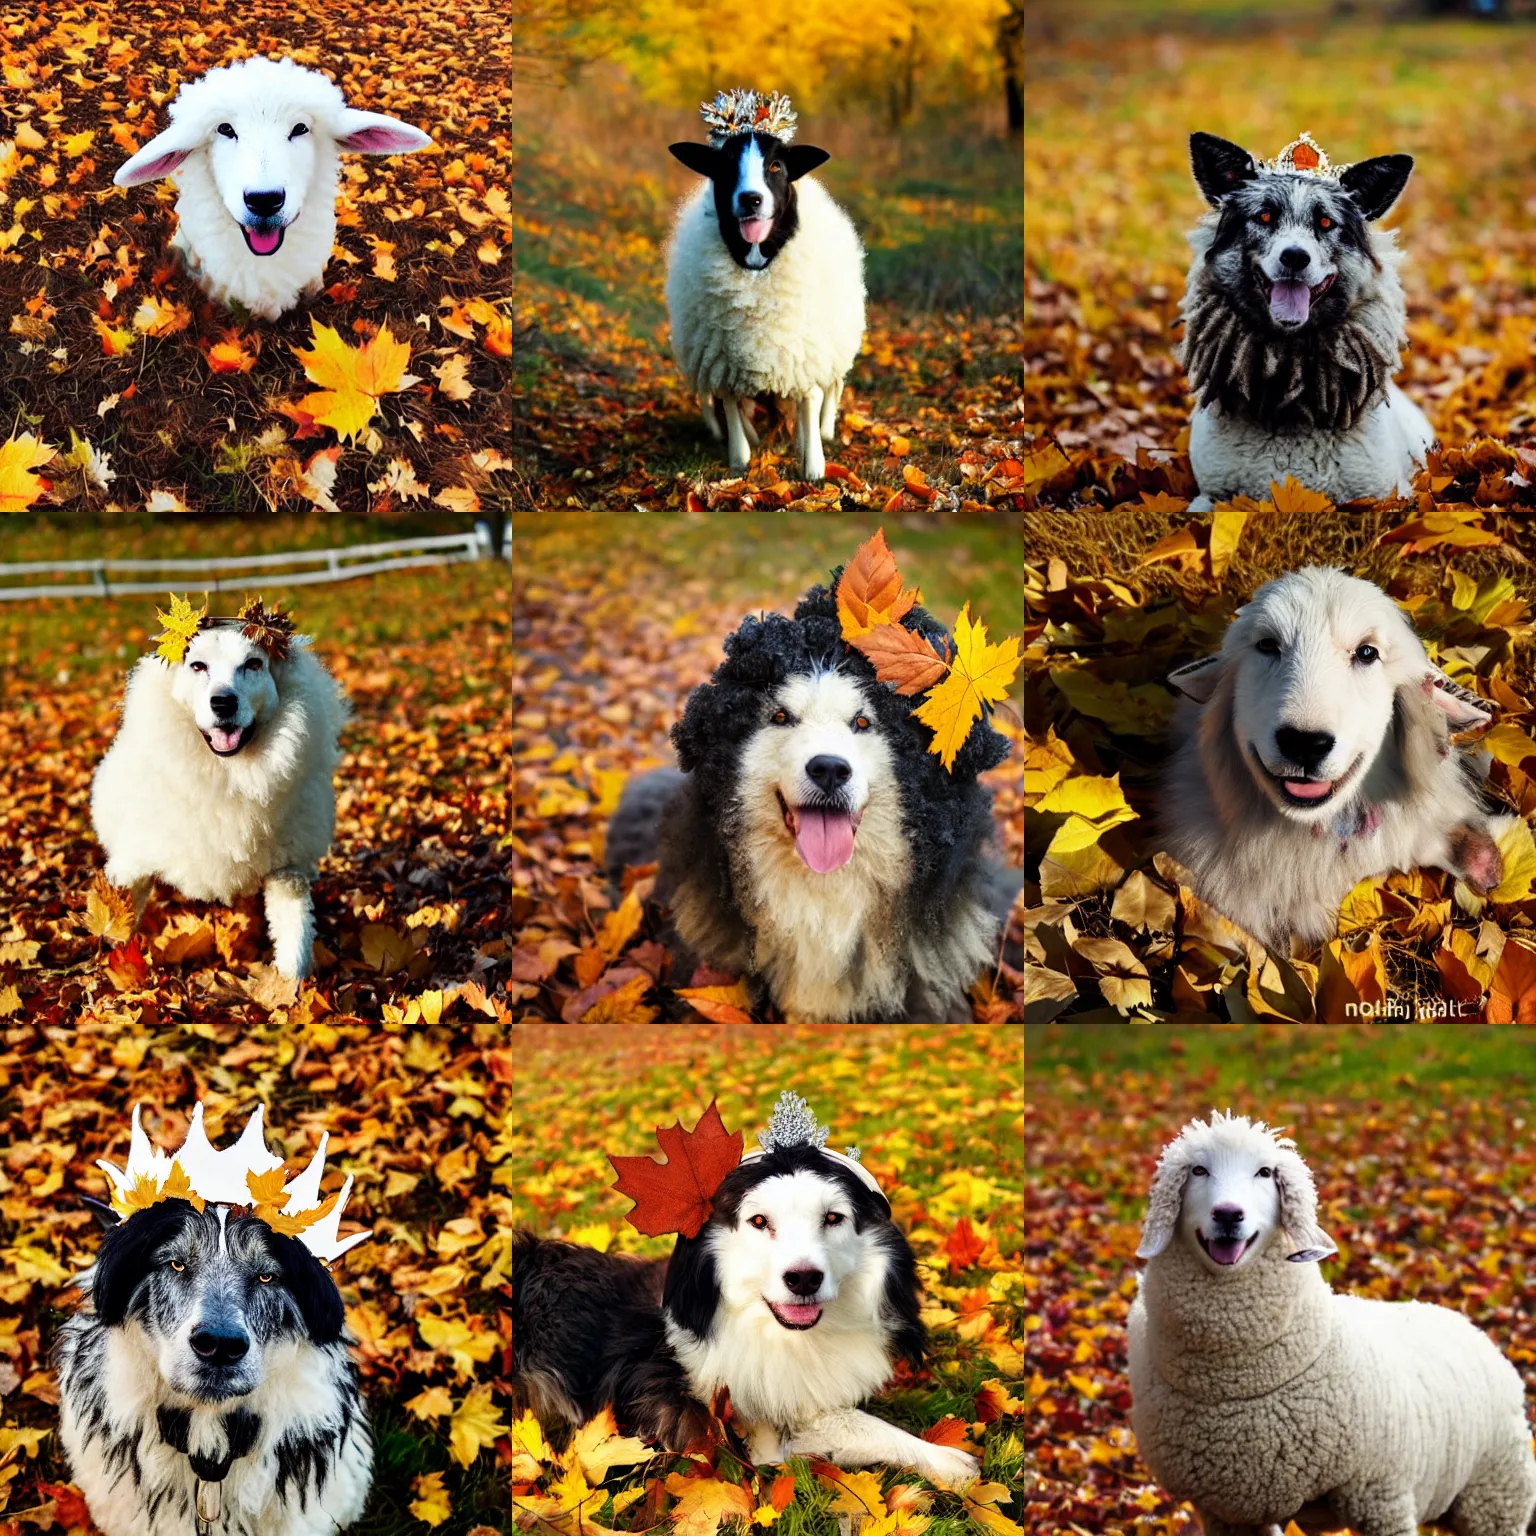 Prompt: sheep dog in autumn wearing a crown of leaves